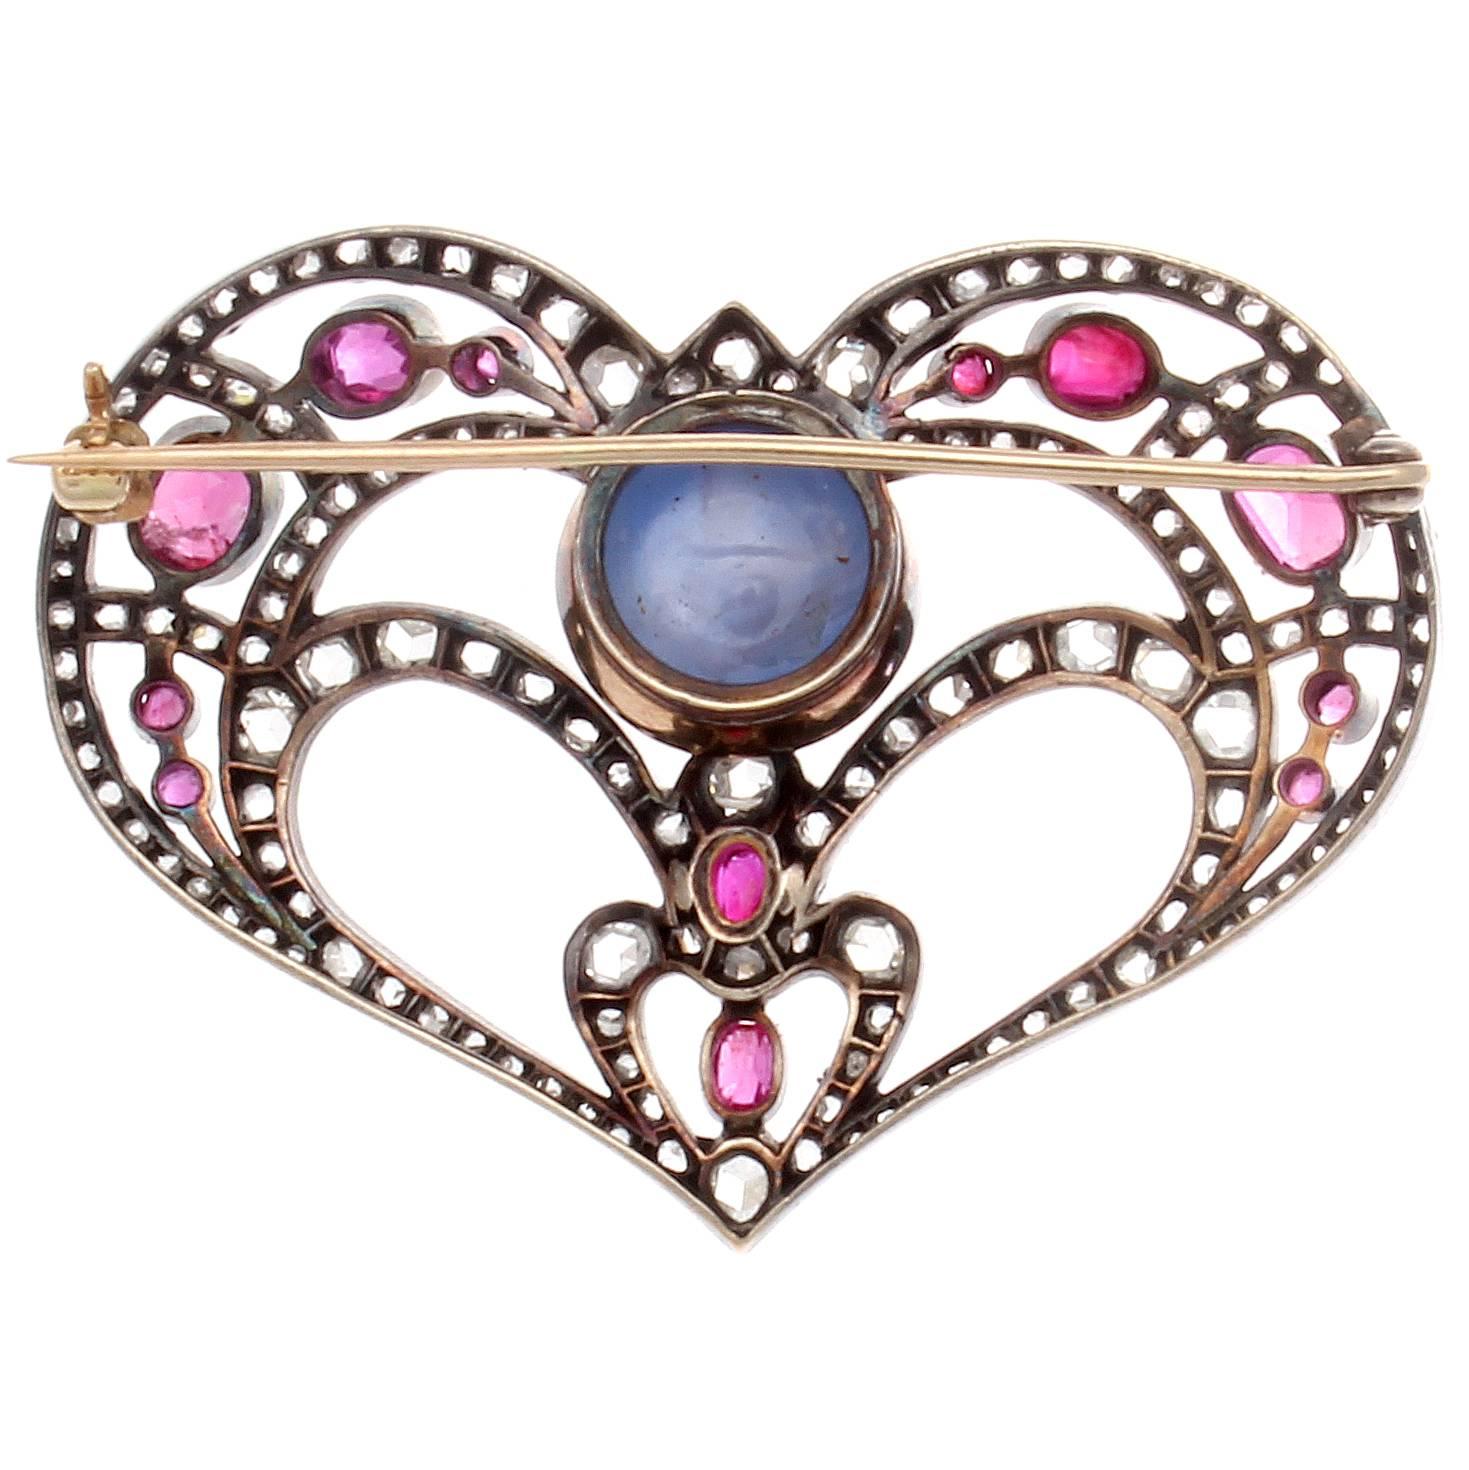 An endearing heart fulfilled with life and color. Featuring a beautiful star sapphire that has flowing veins of diamonds and spinel gently creating this heart motif. Hand crafted in silver and 18k gold.